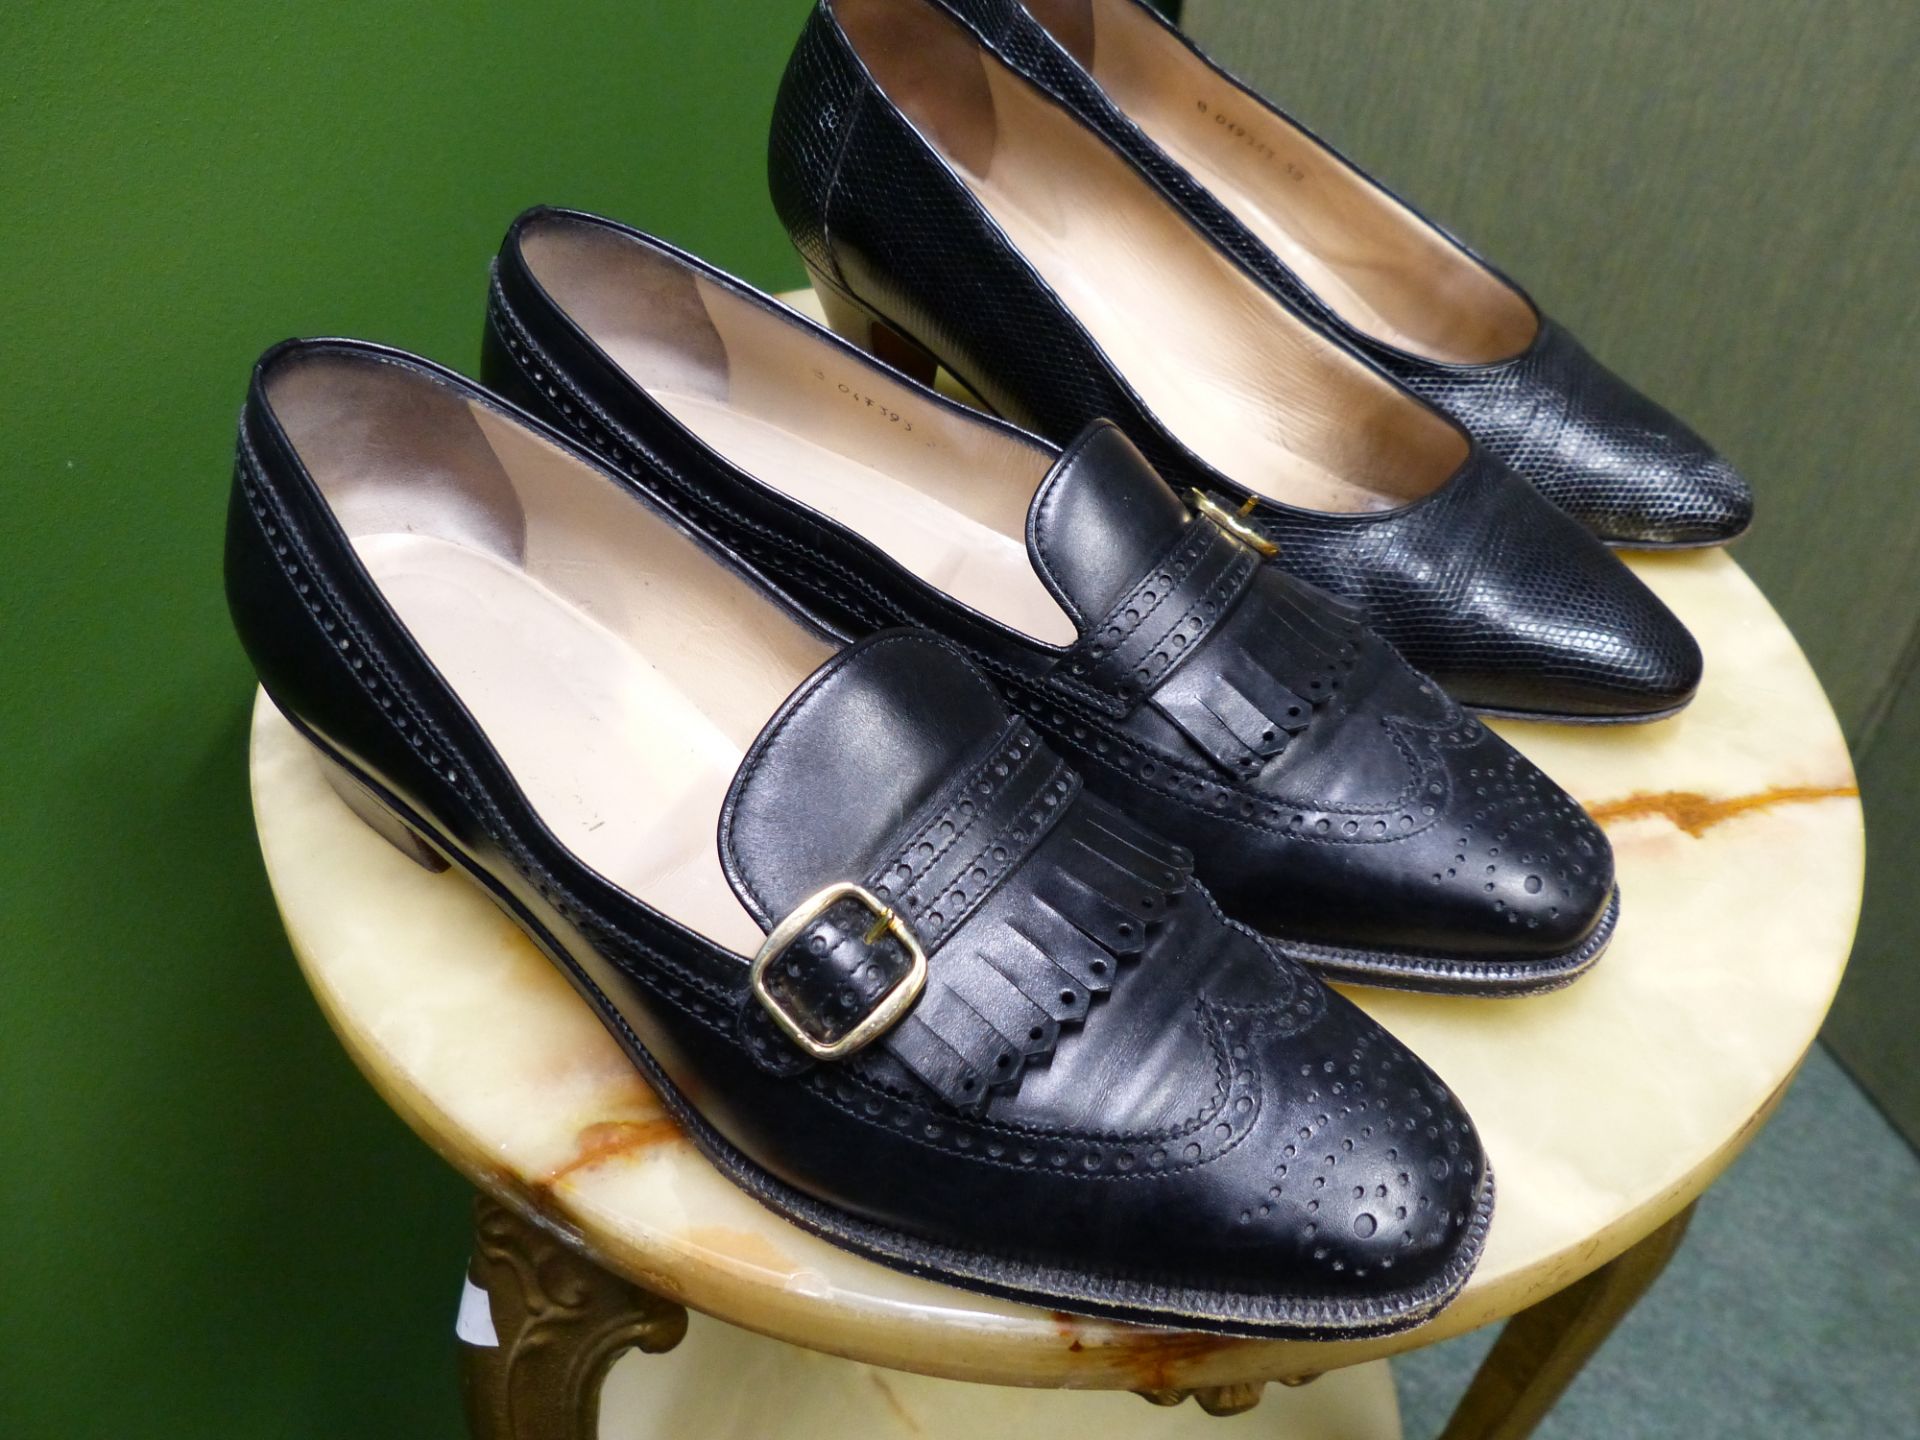 SHOES. TWO PAIRS TANINO CRISCI BLACK HEALS EUR SIZE 39. BLACK LOAFERS EUR SIZE 39. - Image 2 of 11